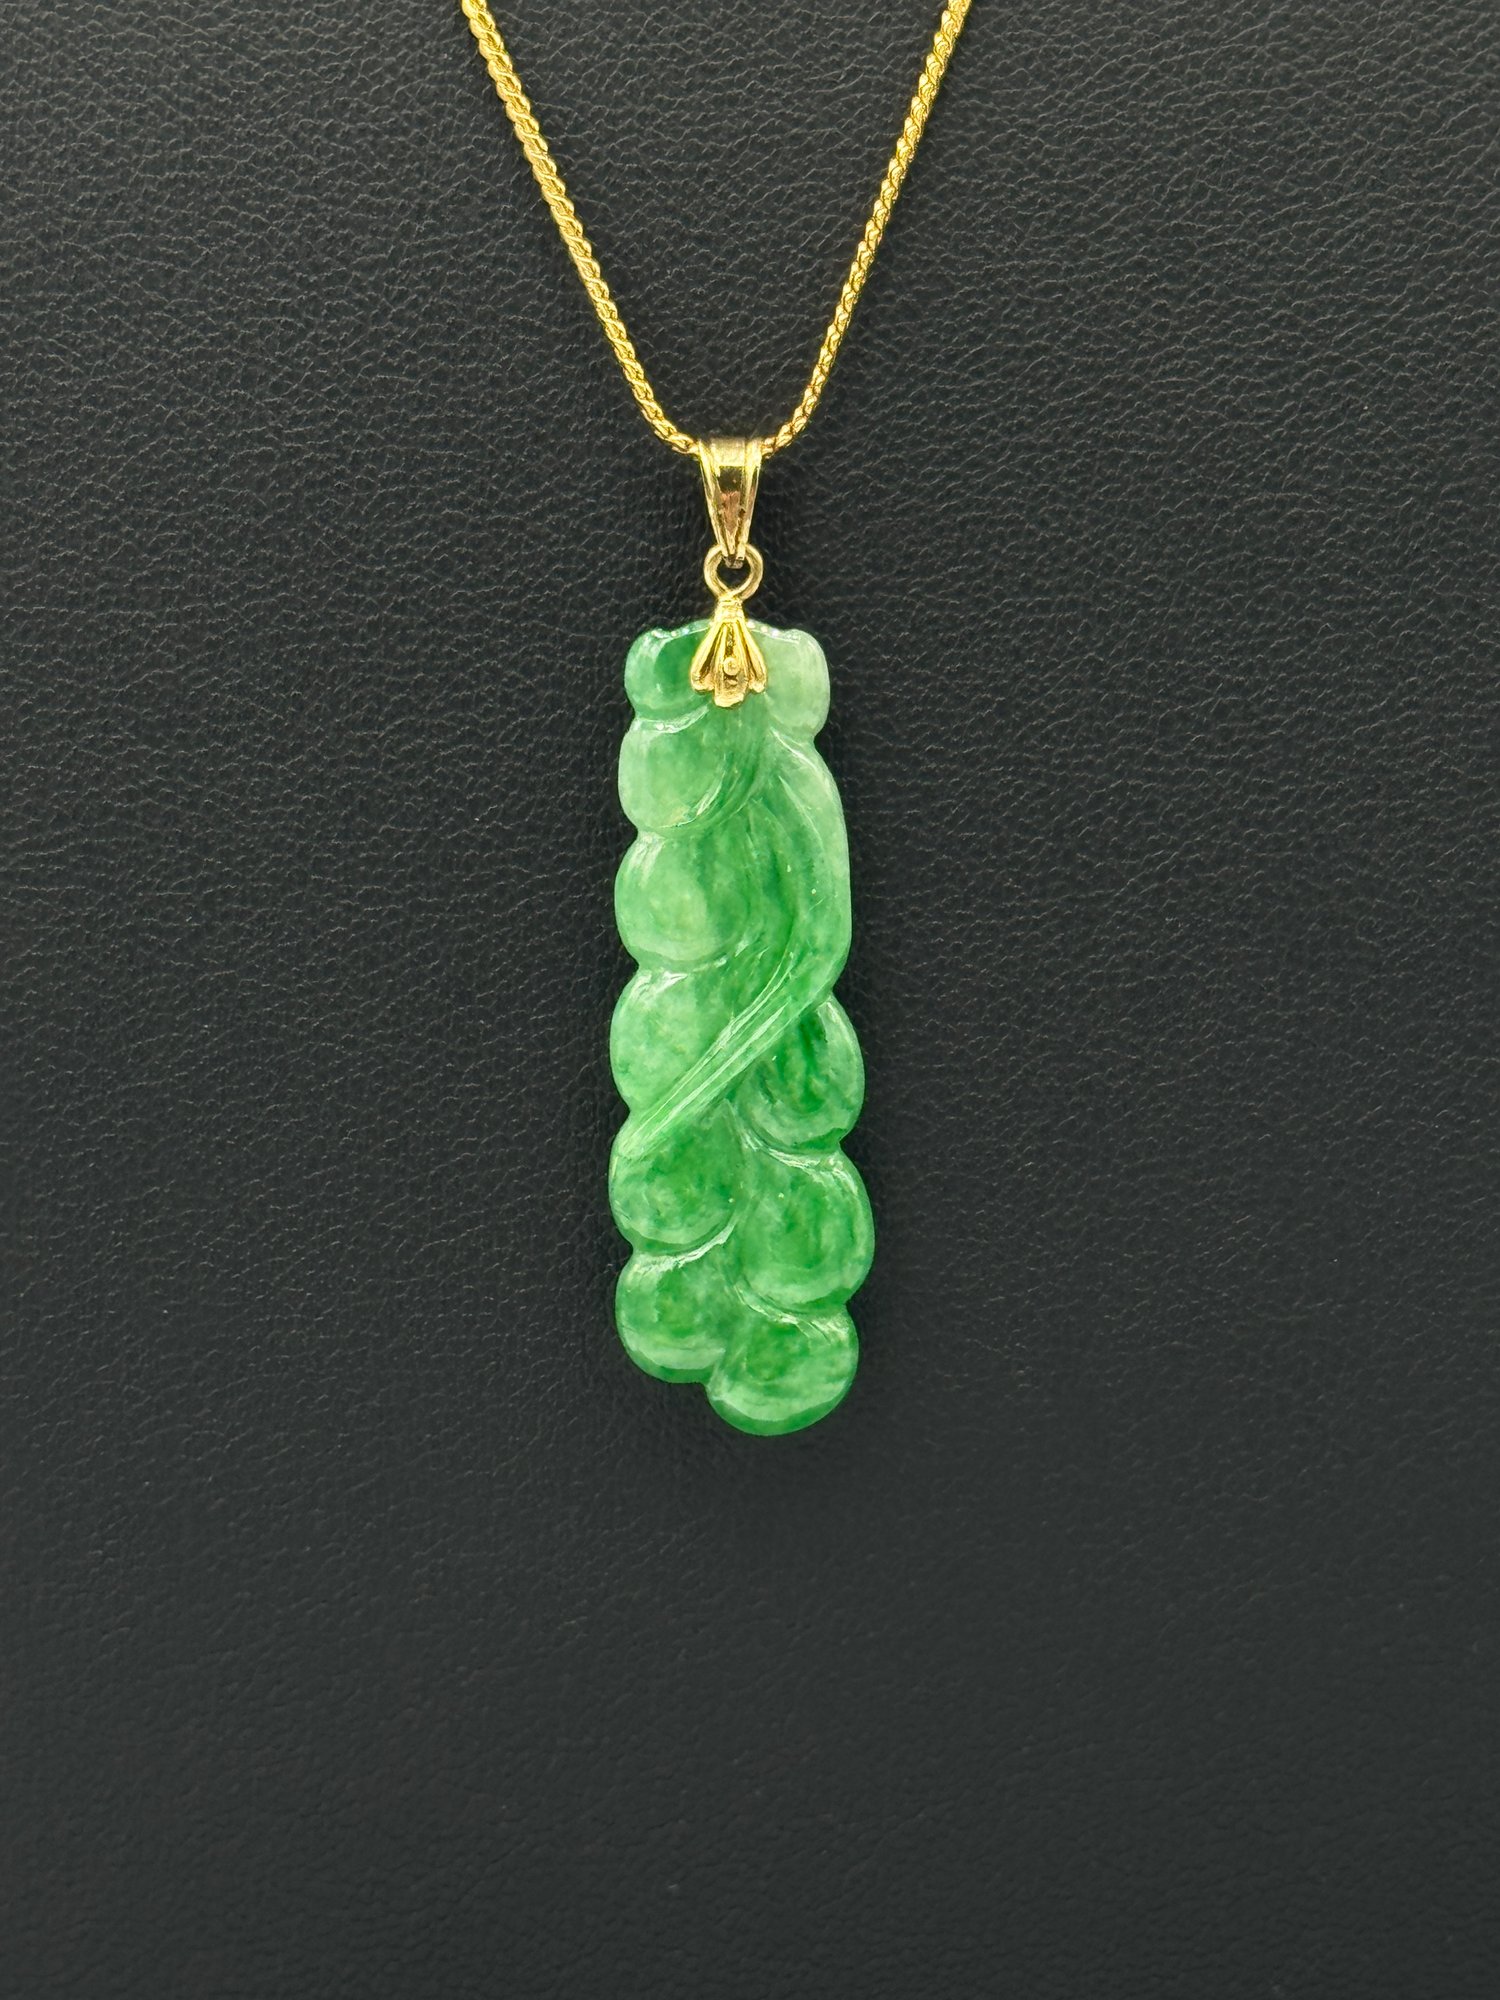 Antique Jade Pendant/ Necklace In 14k Yellow Gold #1829980 ...